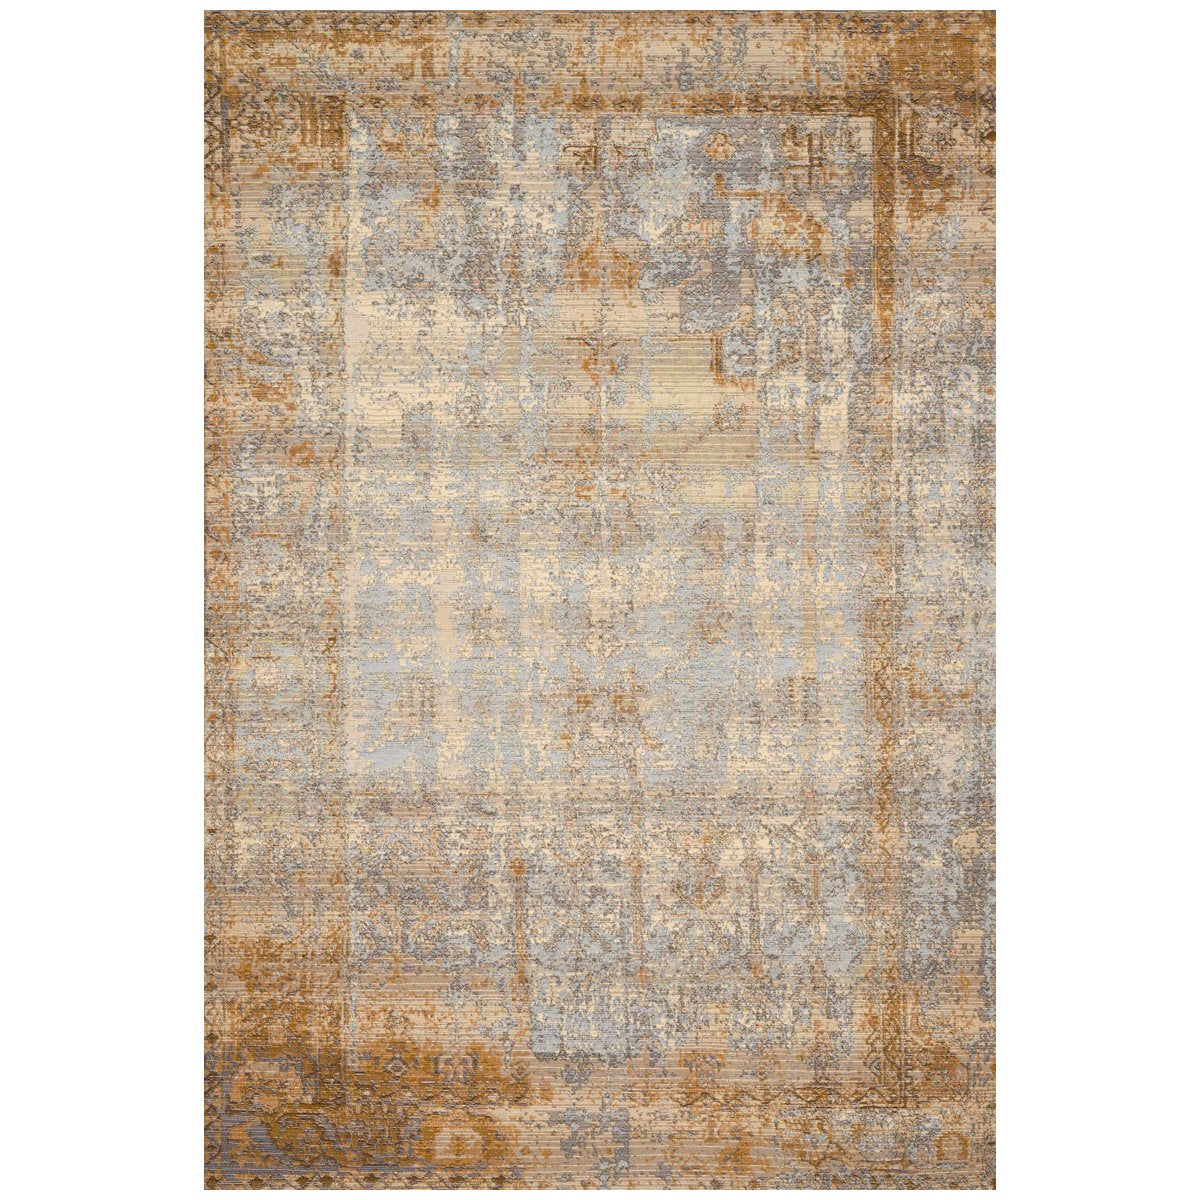 Loloi Mika MIK-11 Antique Ivory Copper Power Loomed Rug